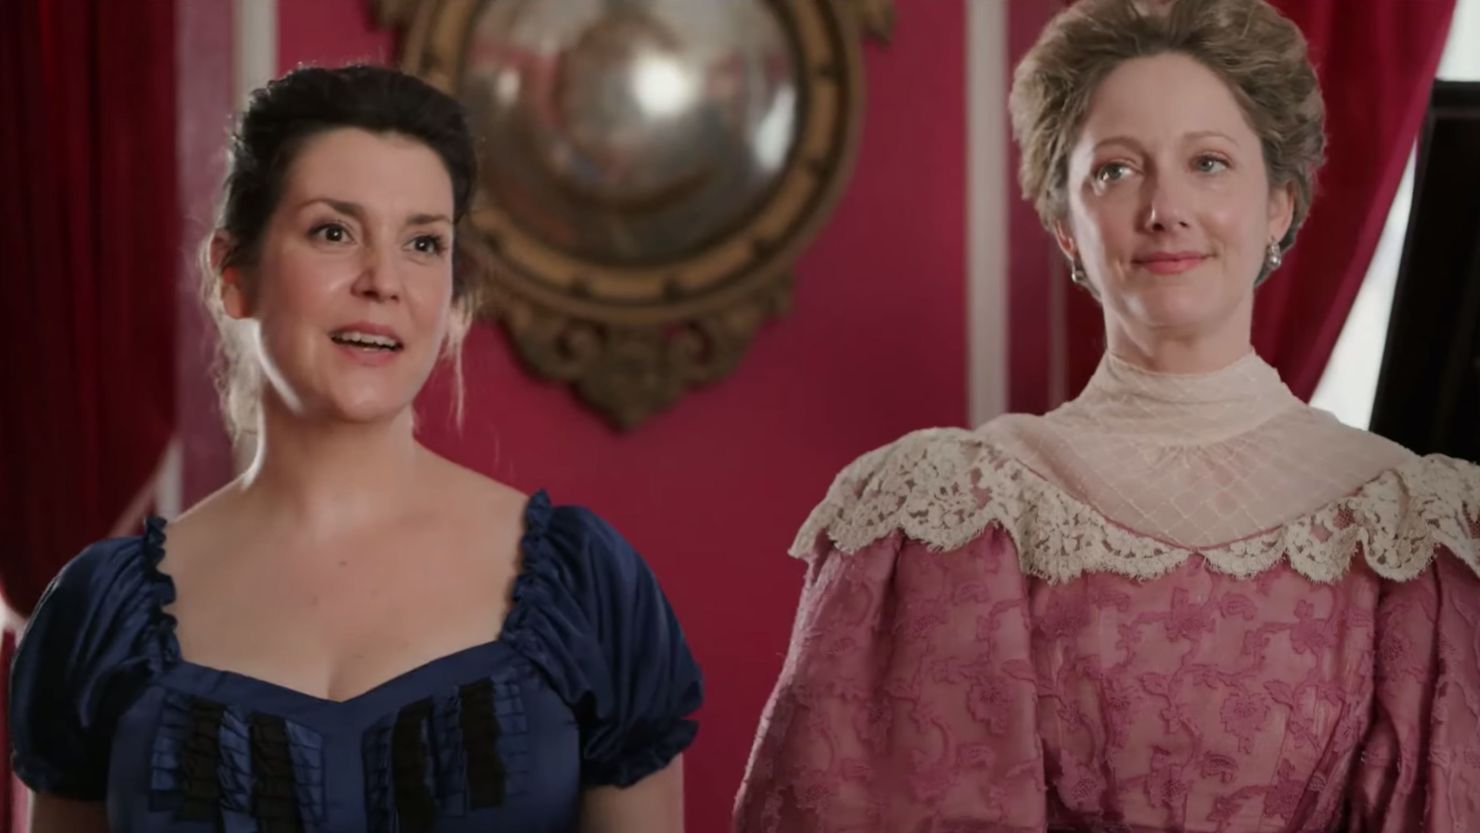 Melanie Lynskey and Judy Greer star in "Lady of the Manor."